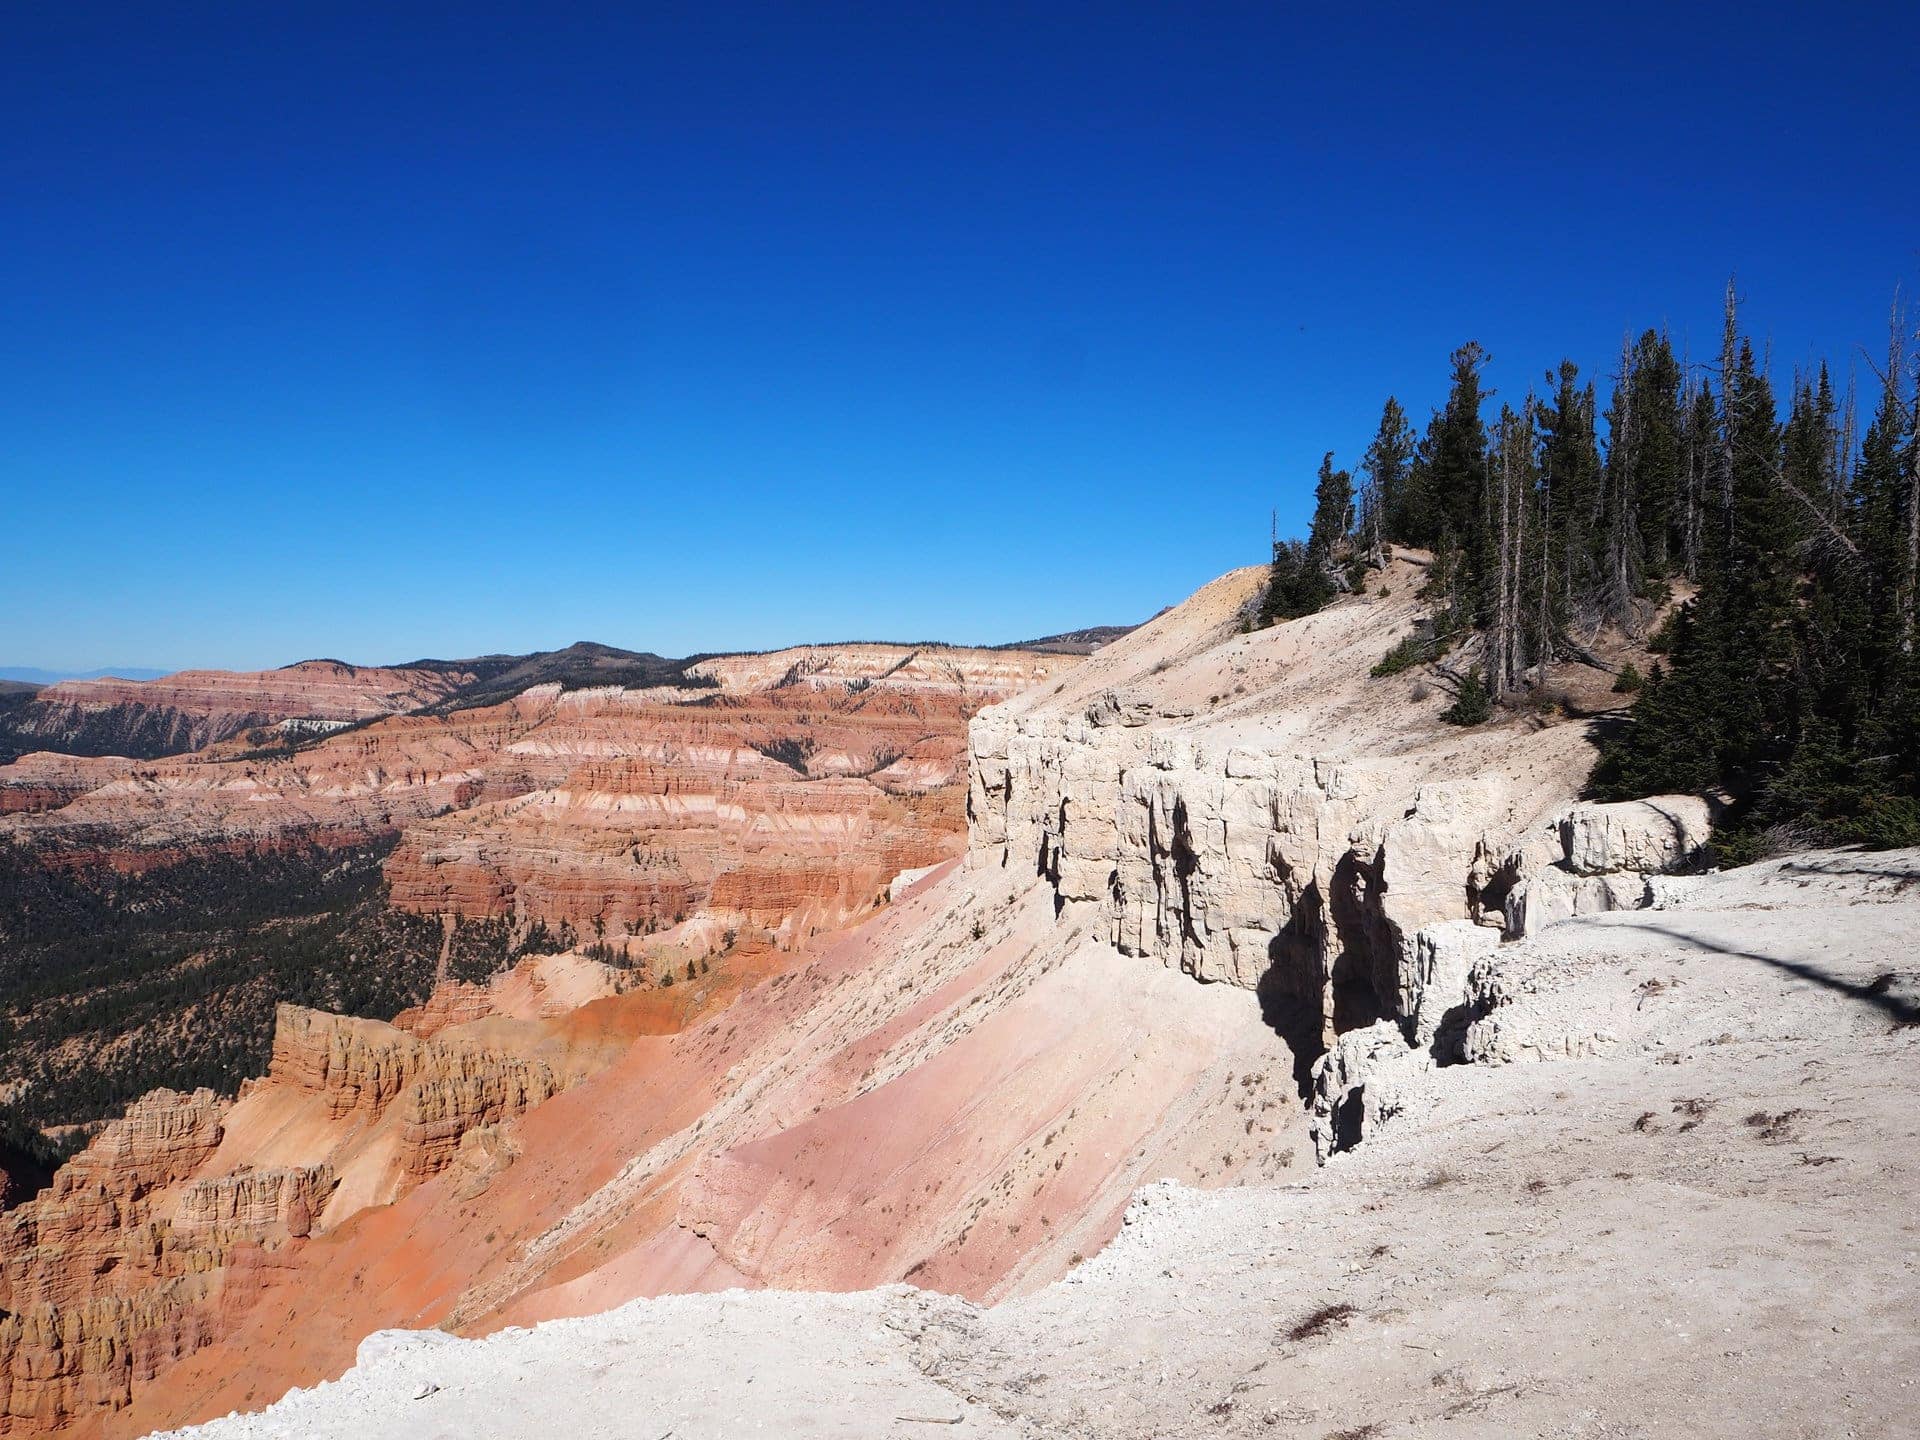 The scenic cliffs at Cedar Breaks National Monument